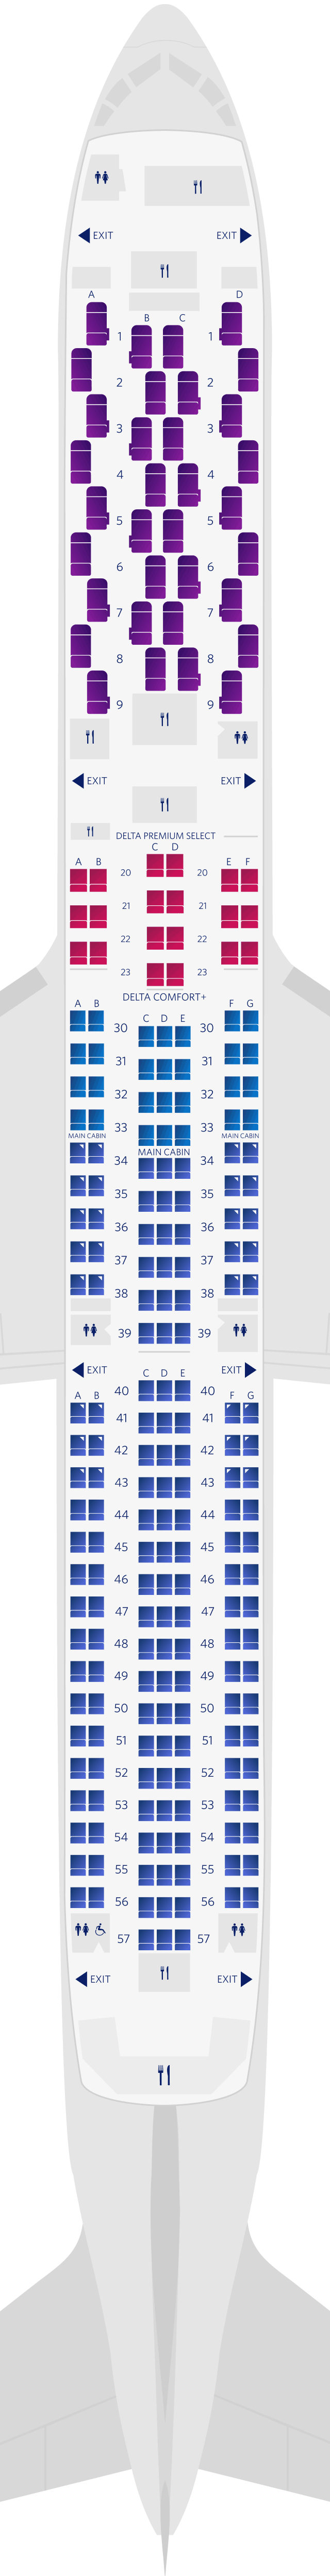 United Airlines Seat Map 767 400 Two Birds Home